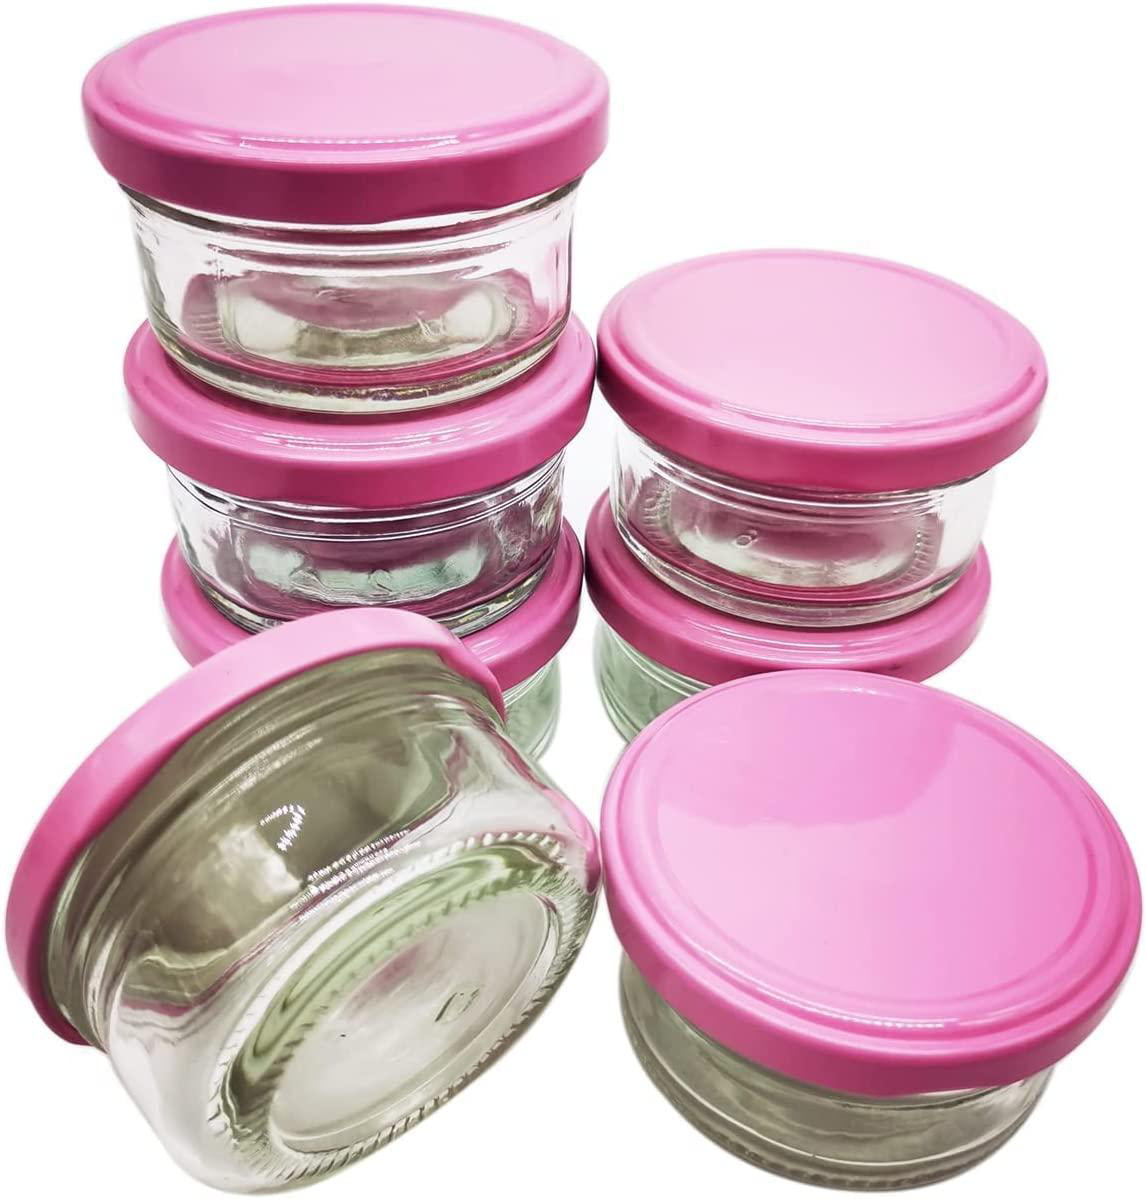 VITEVER [6 Pack] Salad Dressing Container To Go, 2.7 oz Glass Small  Condiment with Lids, Dipping Sauce Cups Set, Leakproof Reusable for Lunch  Box Work